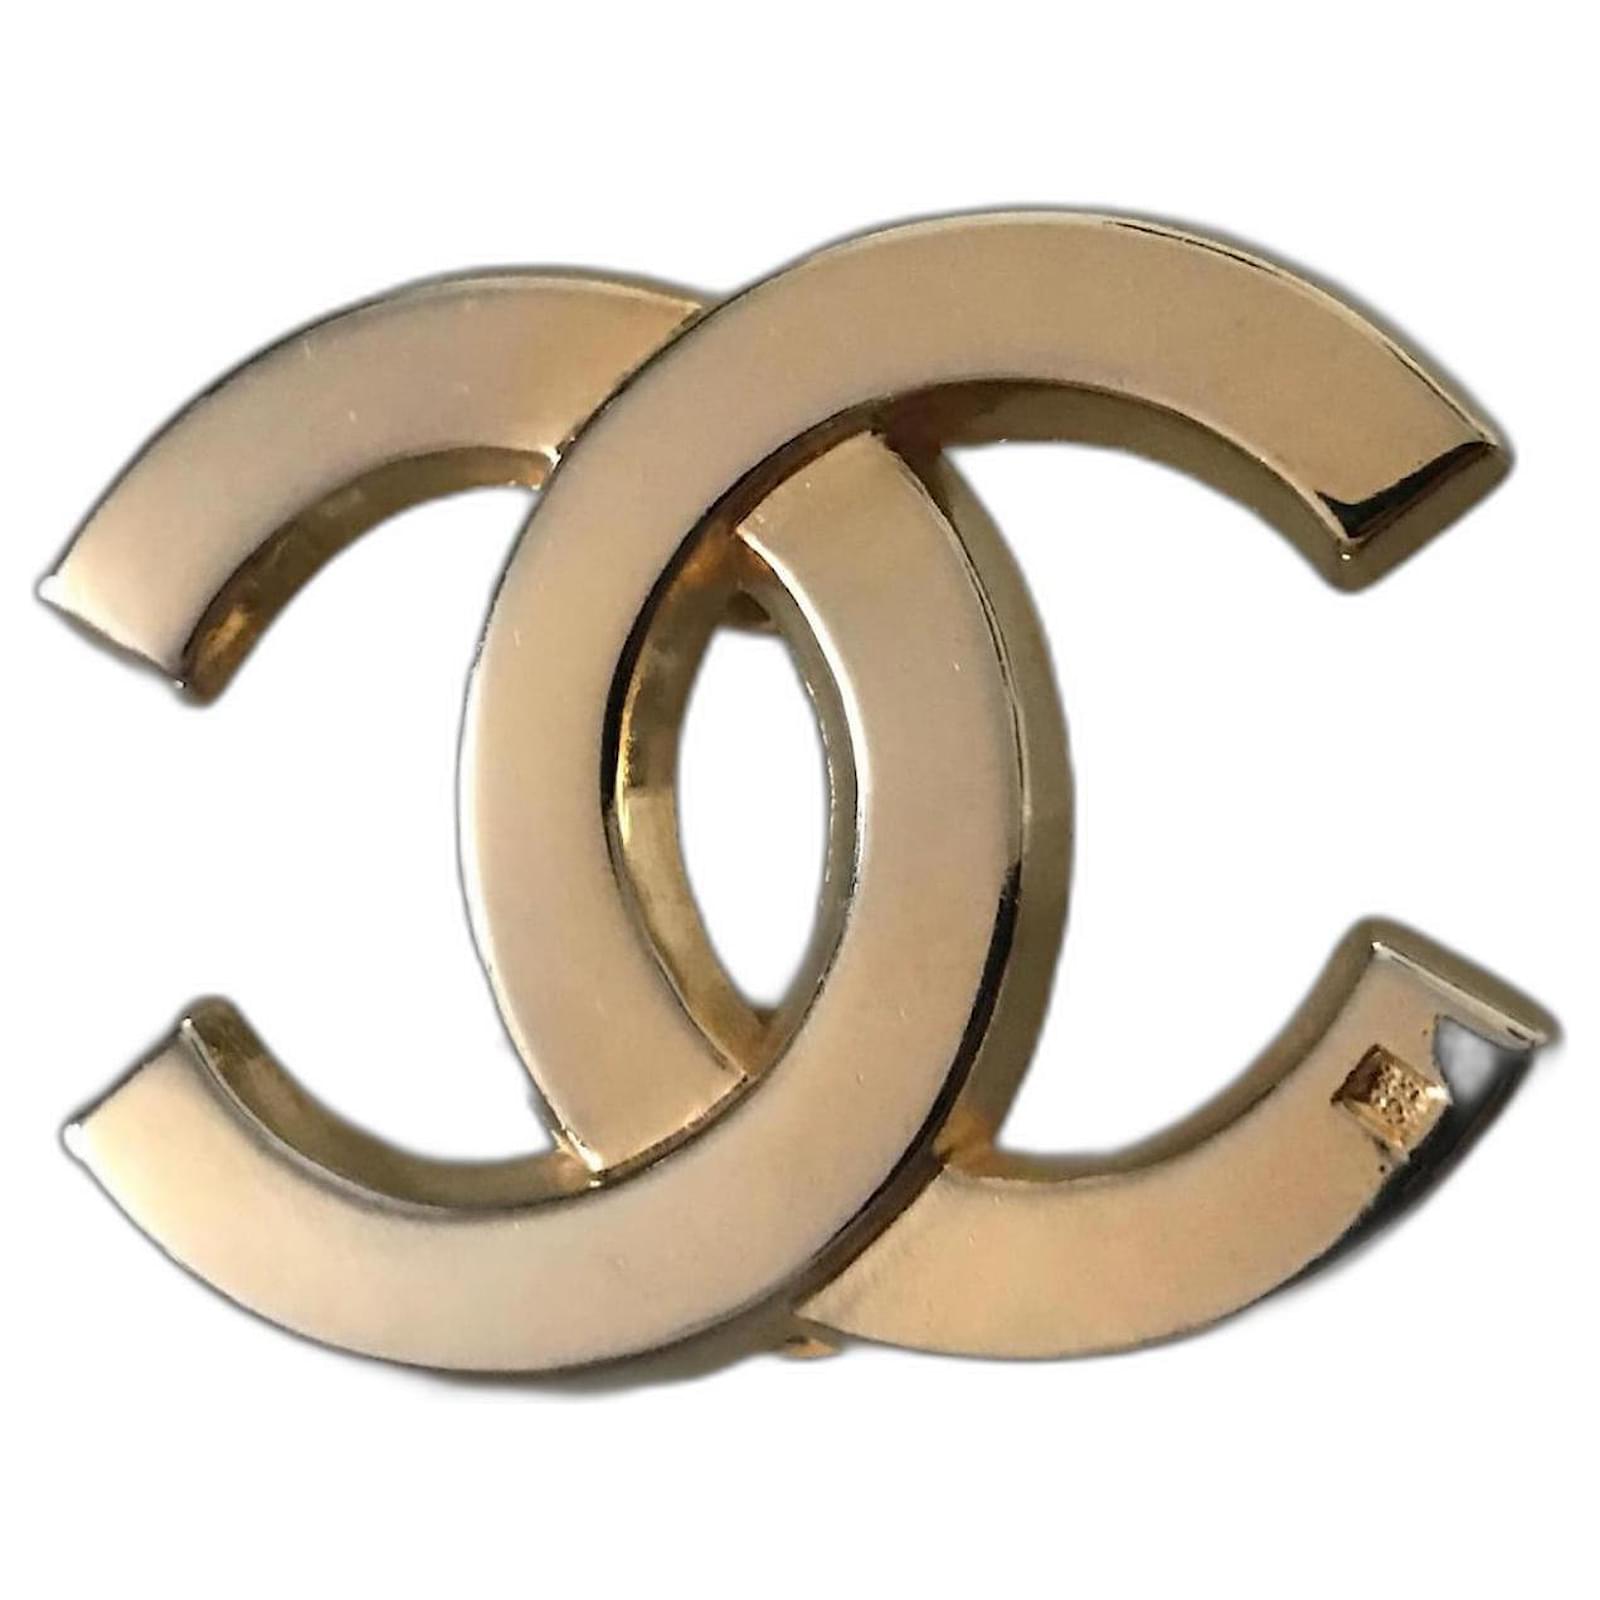 gold chanel pins and brooch cc logo